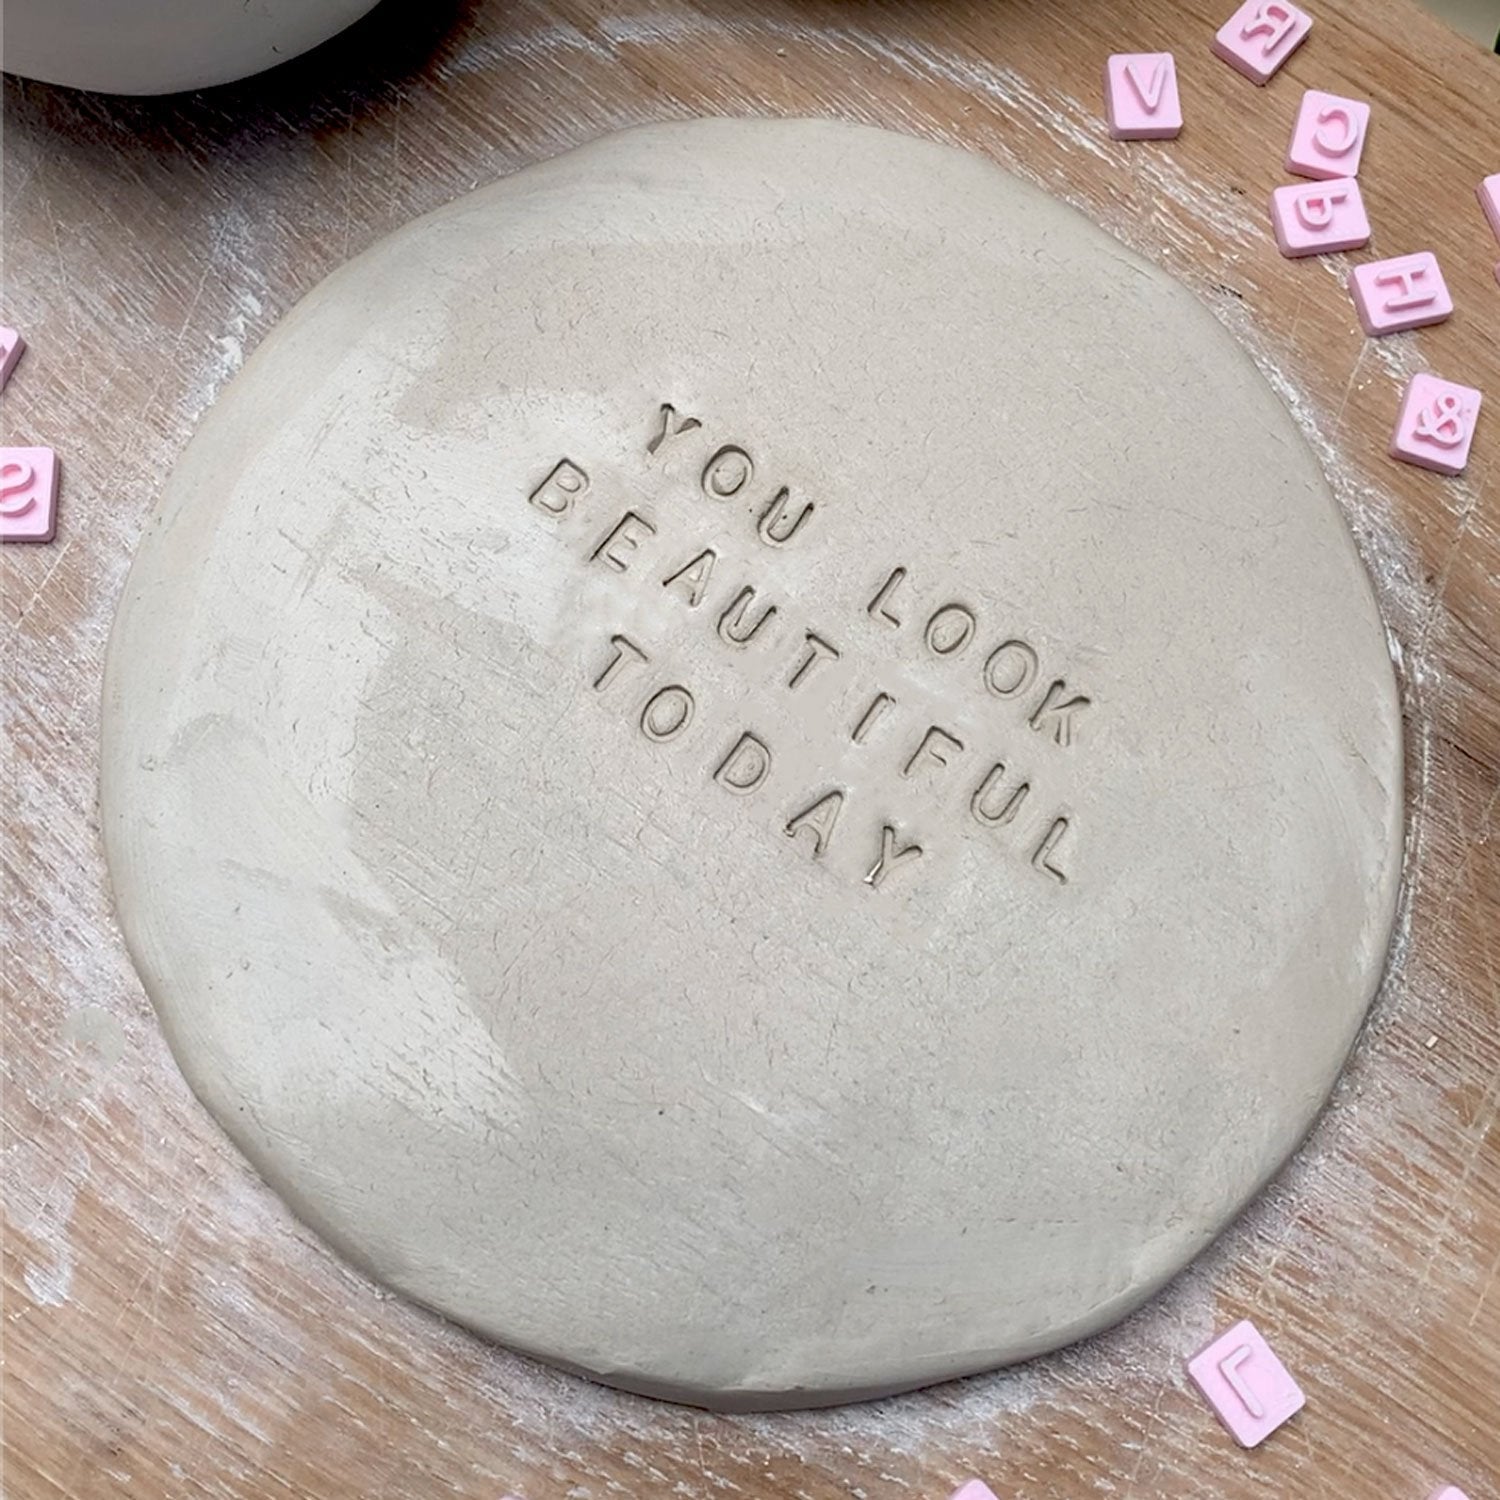 Sculpd Letter Stamps for Air Dry Clay, Personalise Your Pottery Creations,  6mm Tall Letters for Clay Made from Eco-Friendly Material, Available in